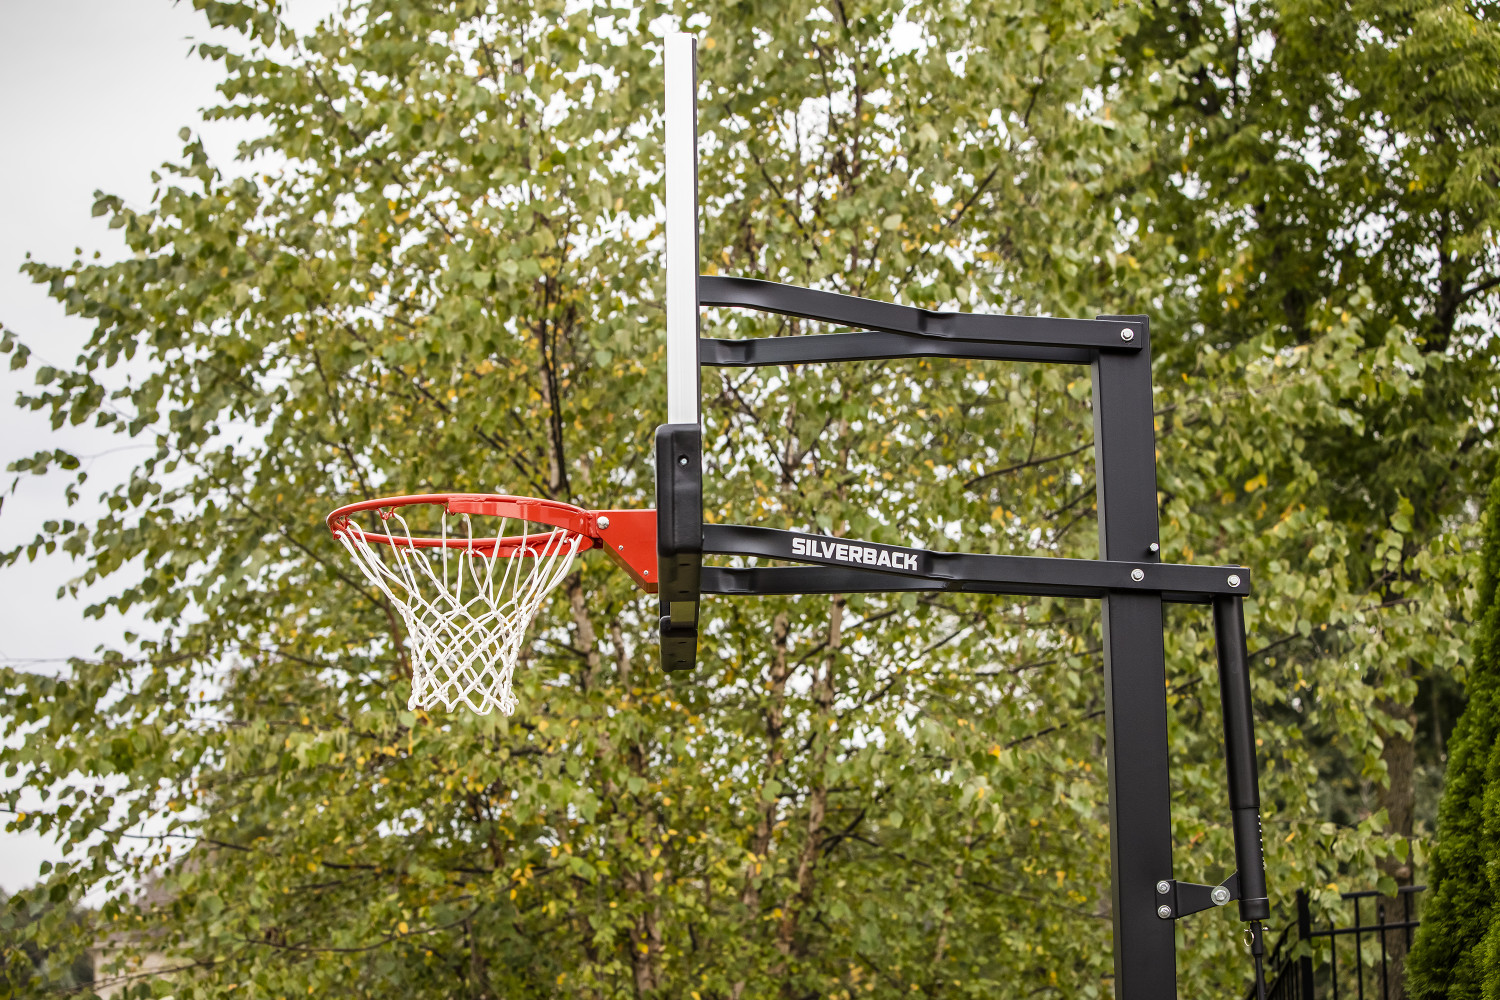 Silverback 54" In-Ground Height-Adjustable Basketball System with Tempered Glass Backboard, Anchor Mounting, and 5-year Limited Warranty - image 5 of 9